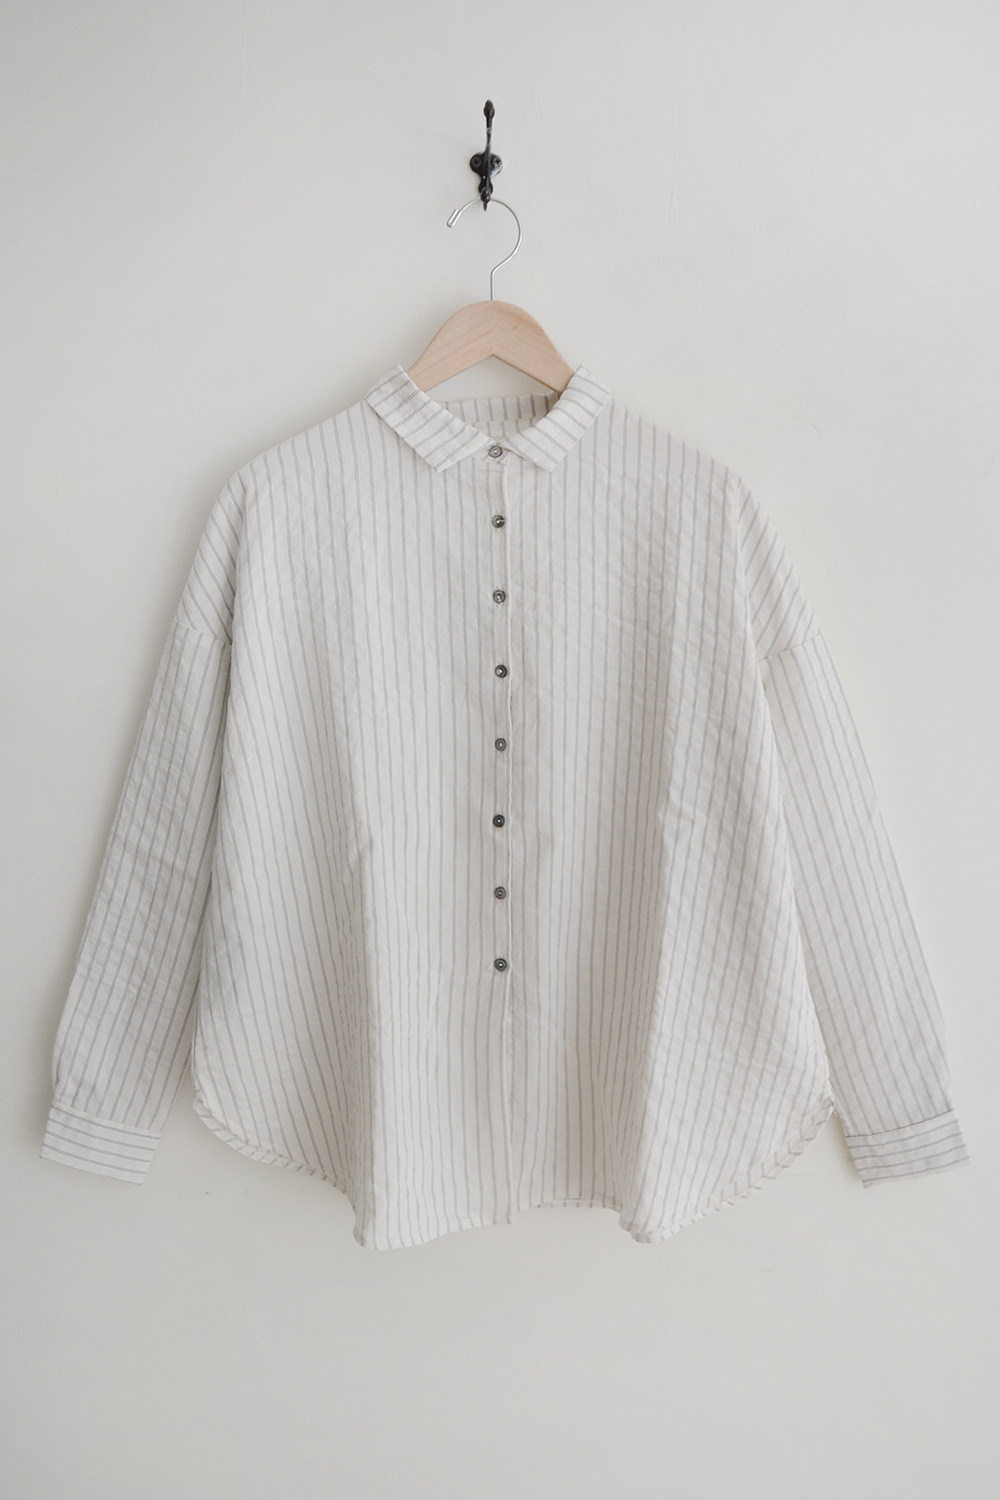 Striped short collar shirt the top picture